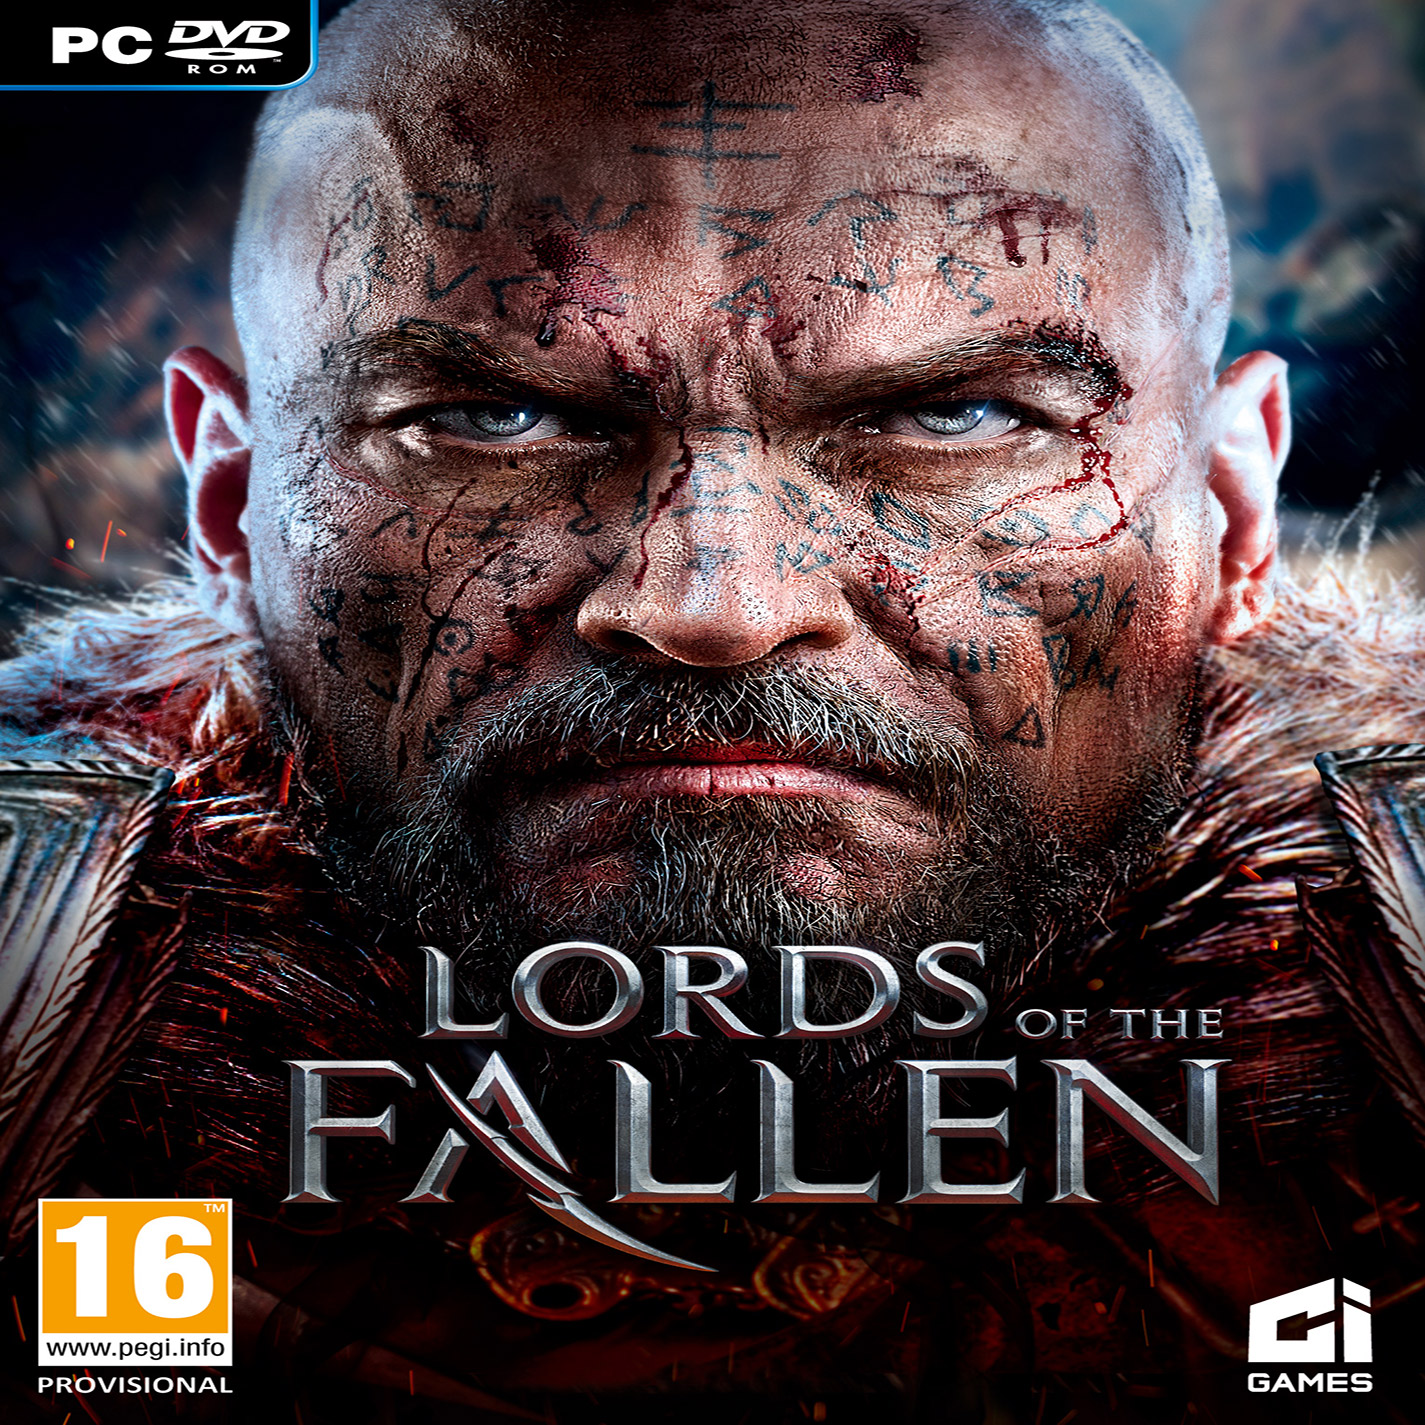 Lords of the Fallen (2014) - predn CD obal